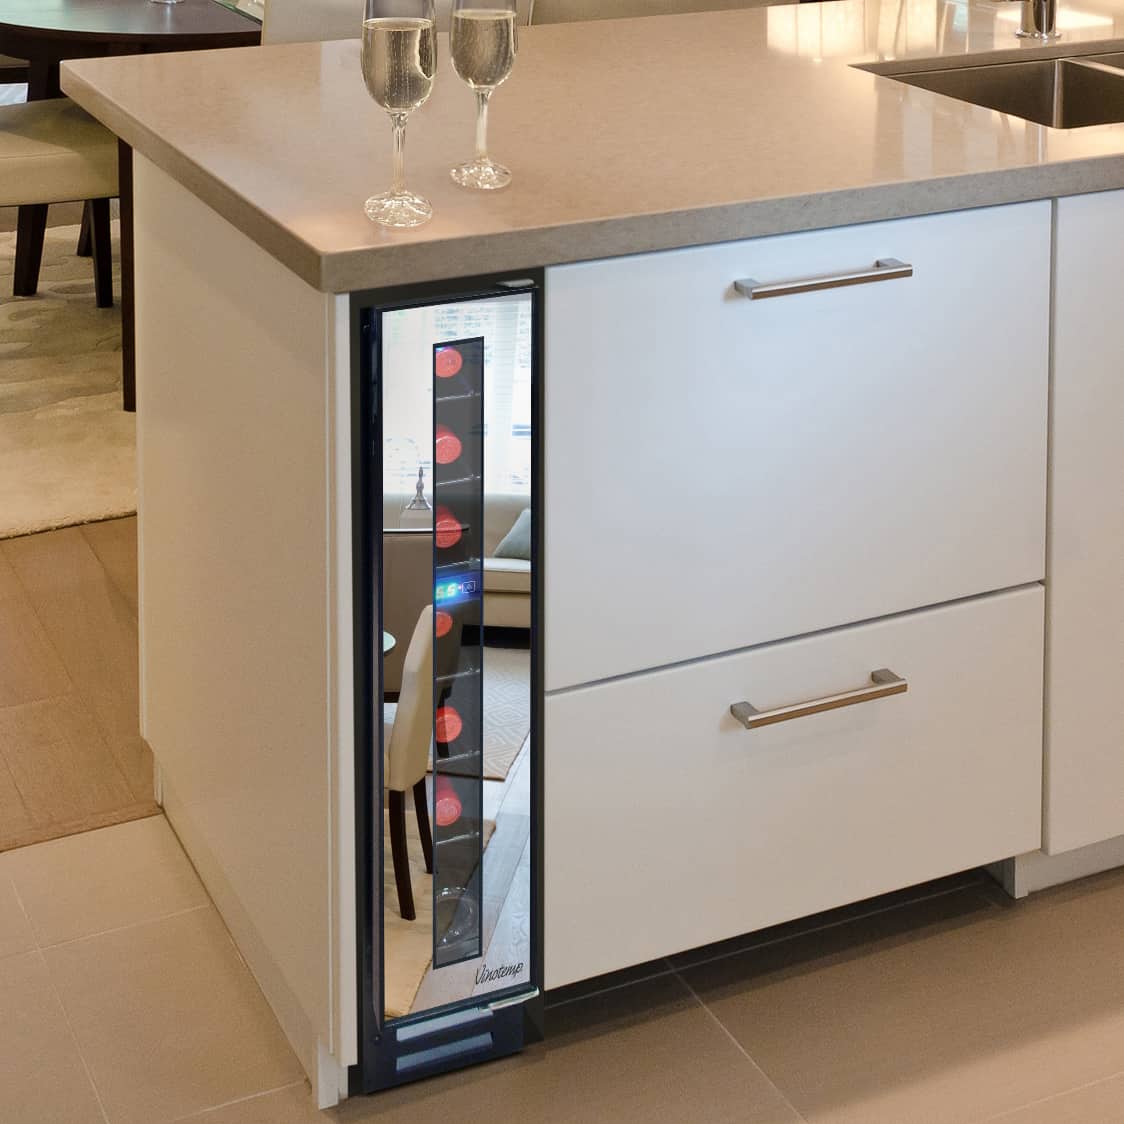 Narrow Wine Cooler by Vinotemp Saves Space and Looks Cool